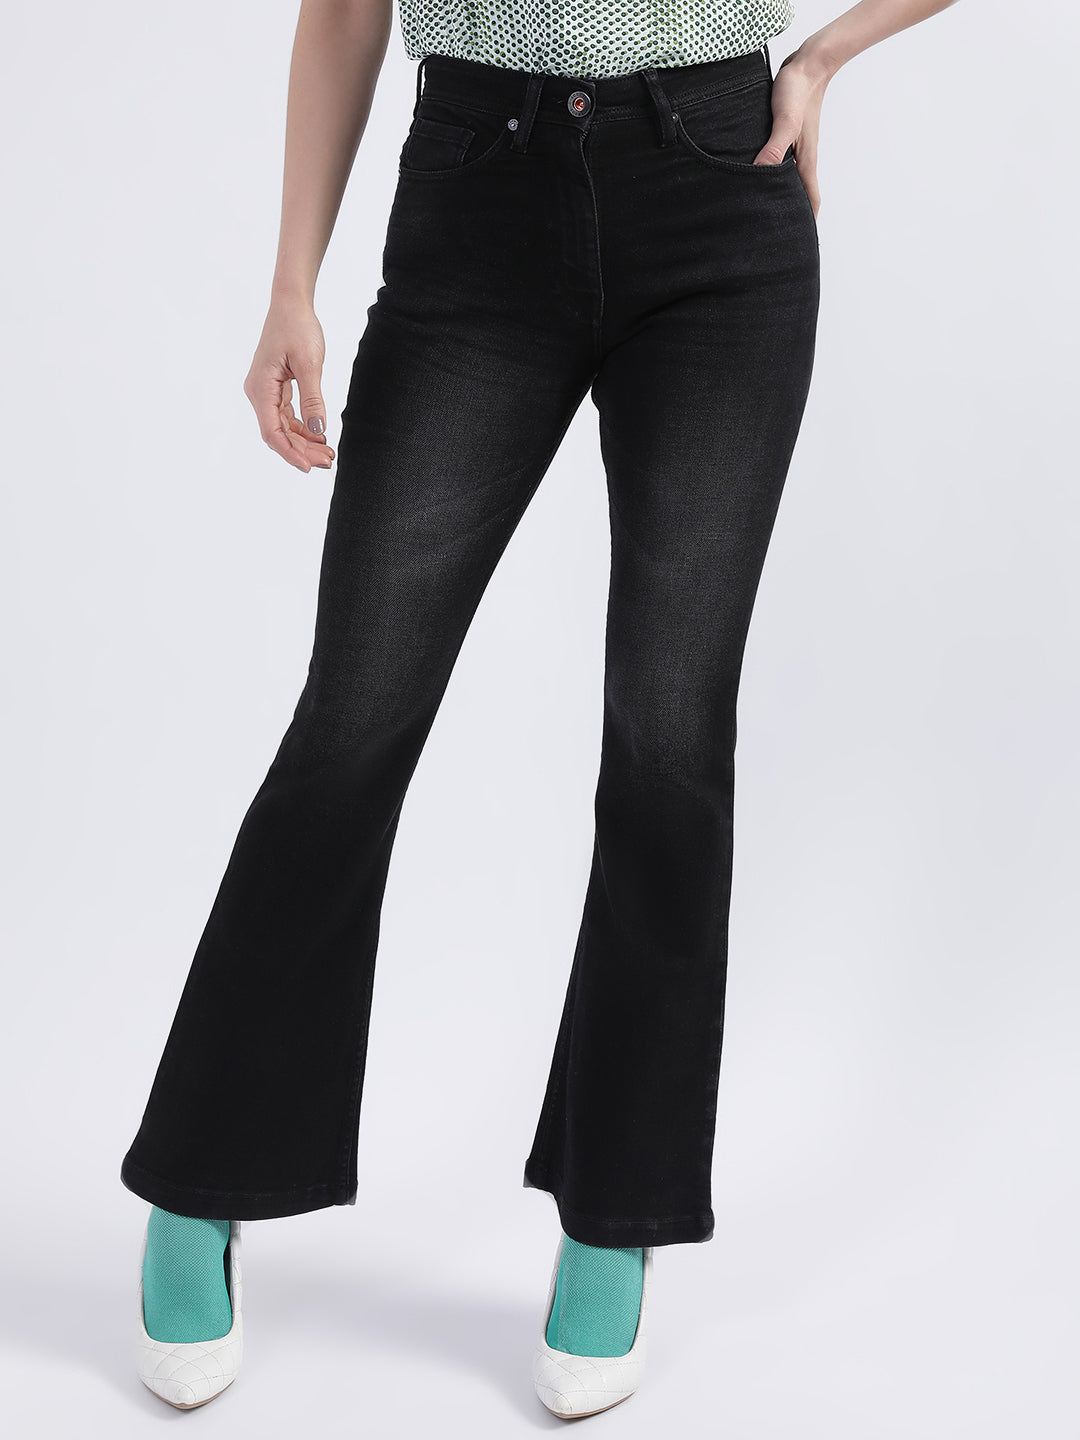 Iconic Women Black Solid Bootcut Jeans